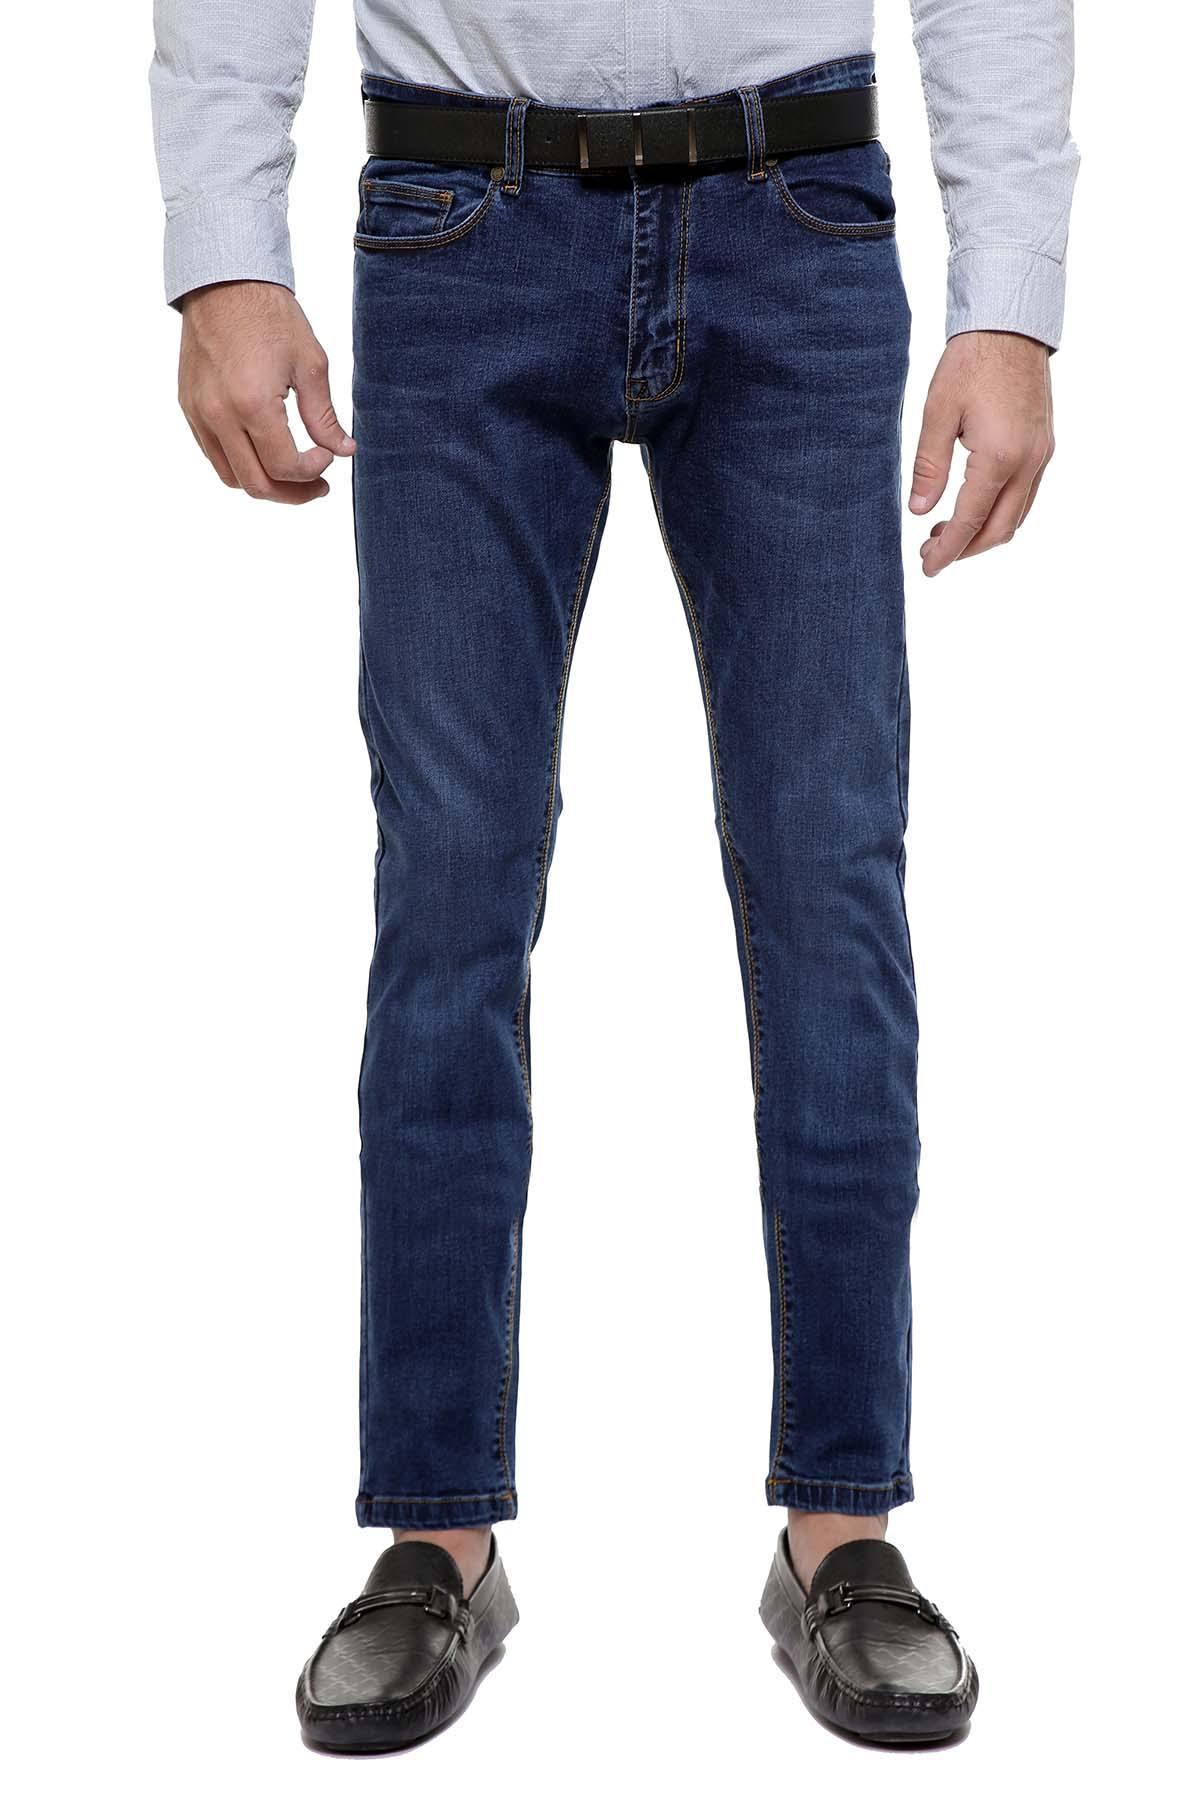 JEAN SKINNY FIT DENIM BLUE at Charcoal Clothing